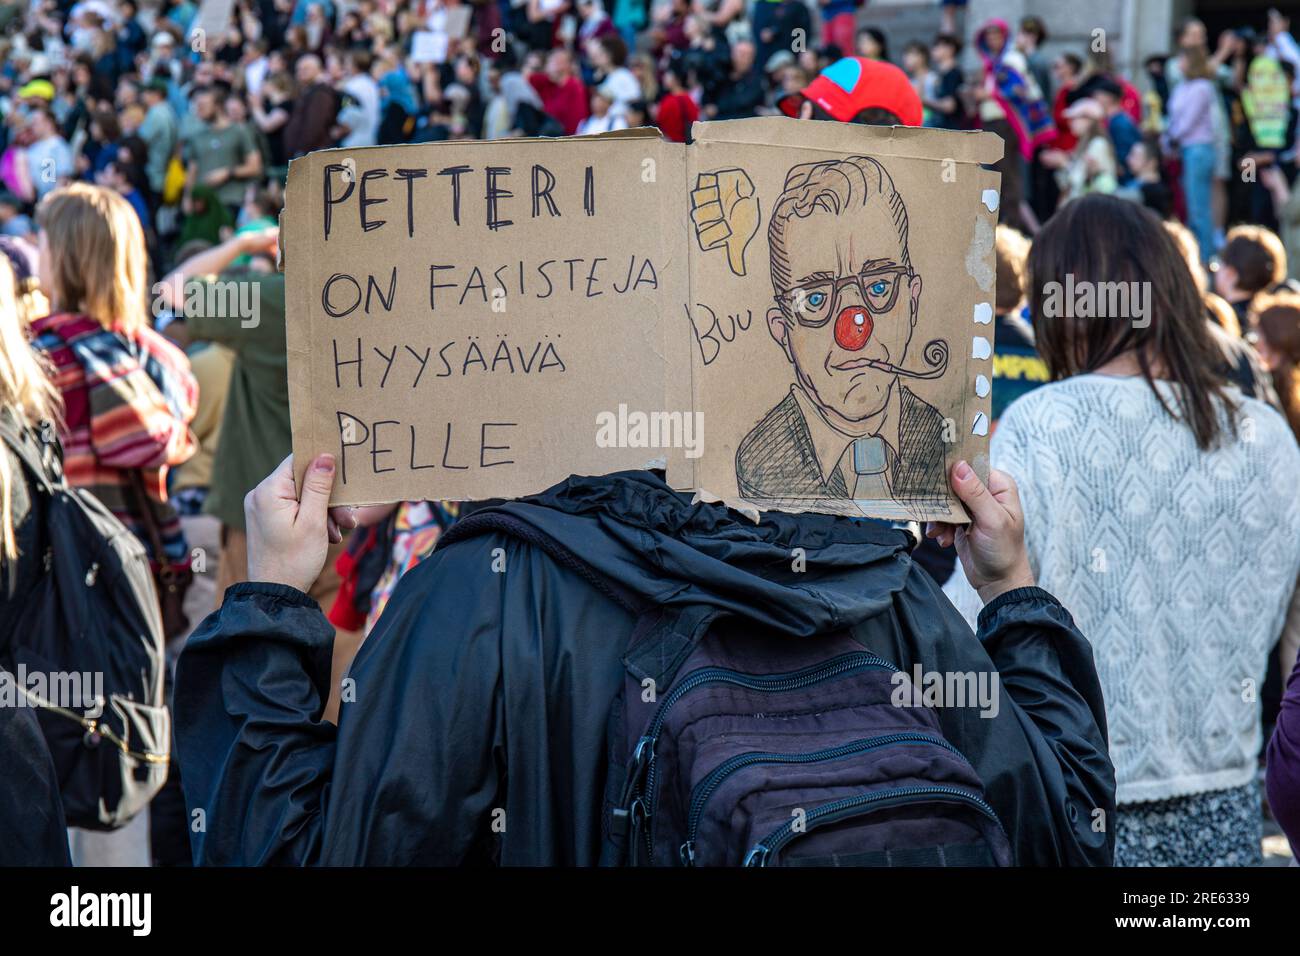 Man holding handmade cardboard sign at Nollatoleranssi! demonstration against far-right ministers in PM Petteri Orpo's right-wing coalition government. Stock Photo